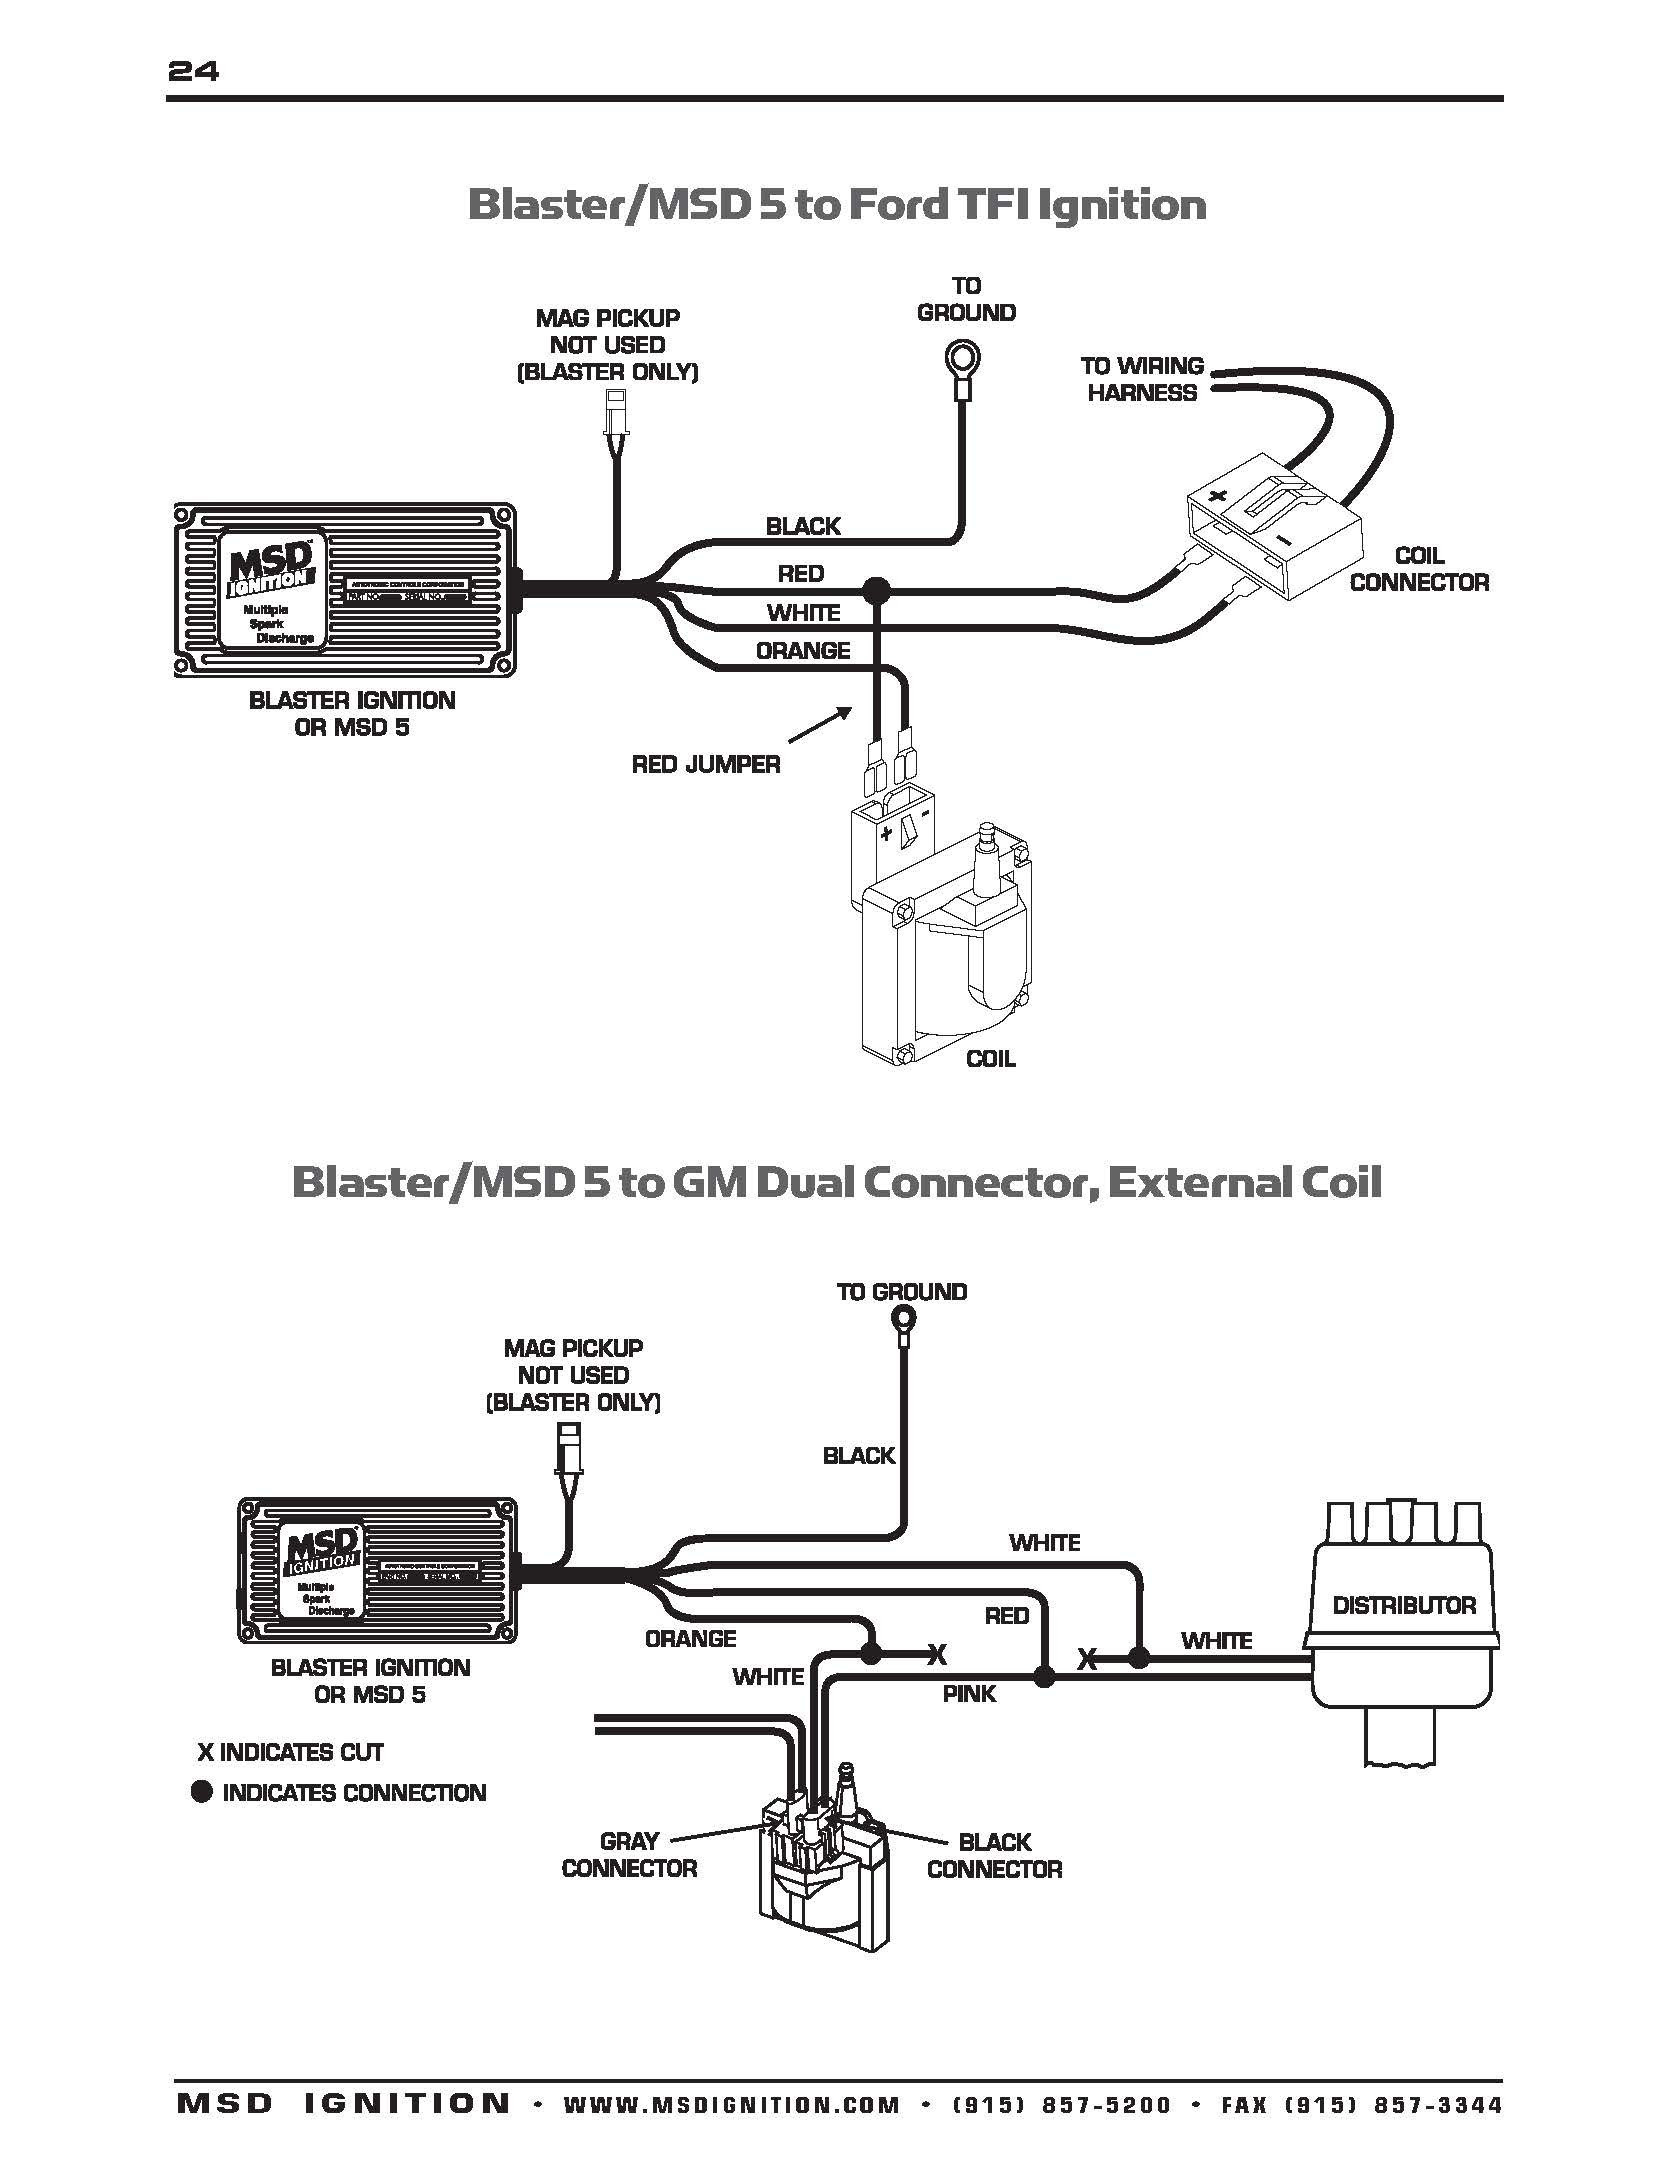 Briggs And Stratton Ignition Coil Wiring Diagram | Manual E-Books - Briggs And Stratton Ignition Coil Wiring Diagram